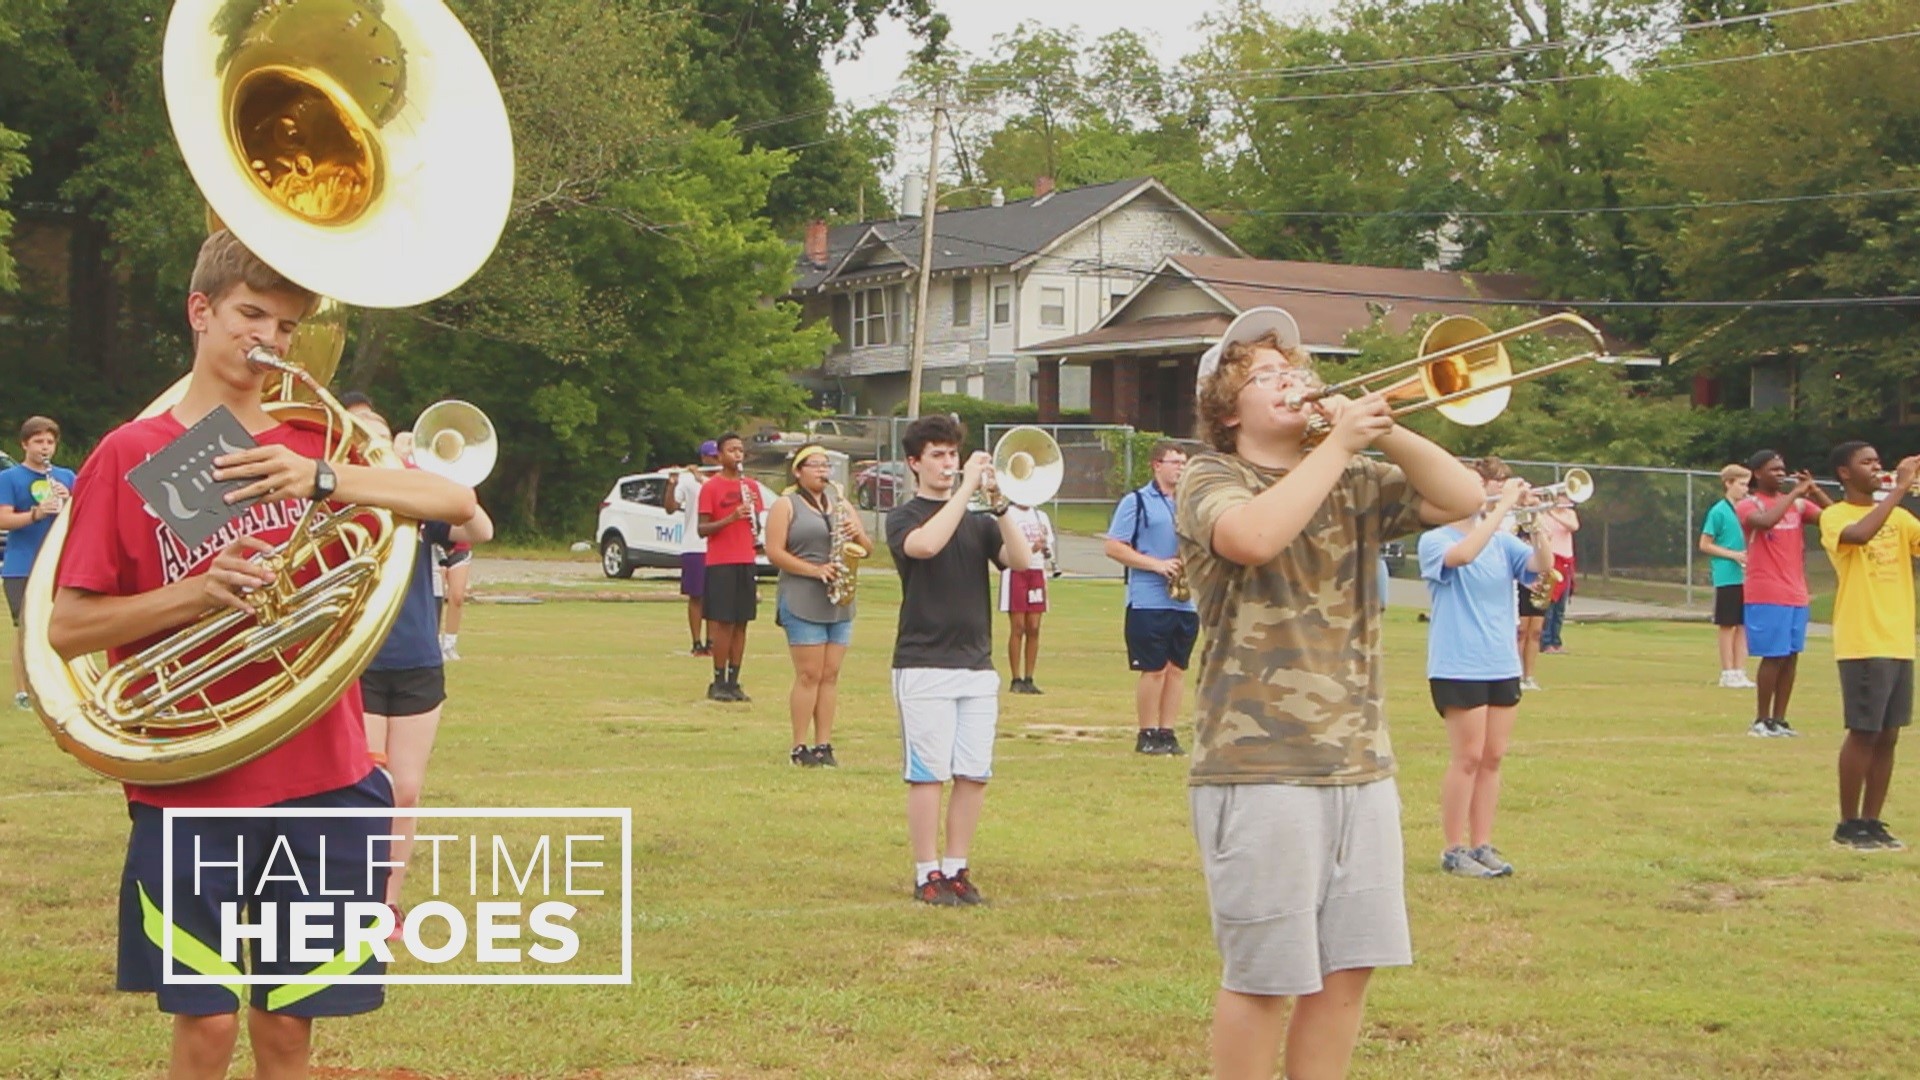 The North Little Rock High School Marching band is finding that change can be a good thing.